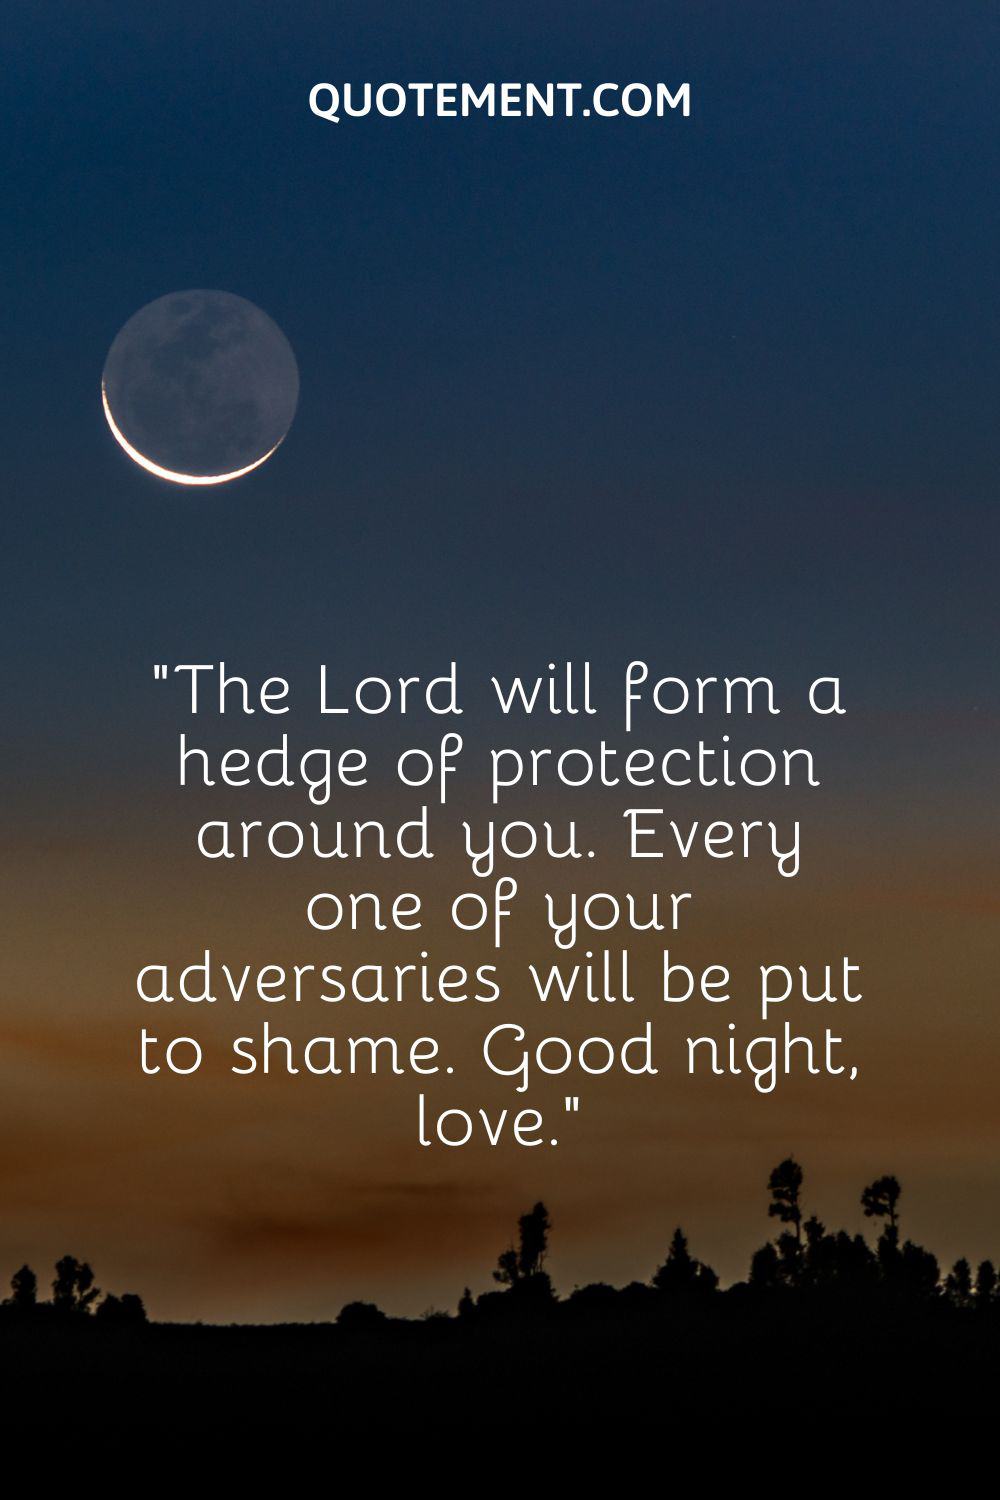 The Lord will form a hedge of protection around you